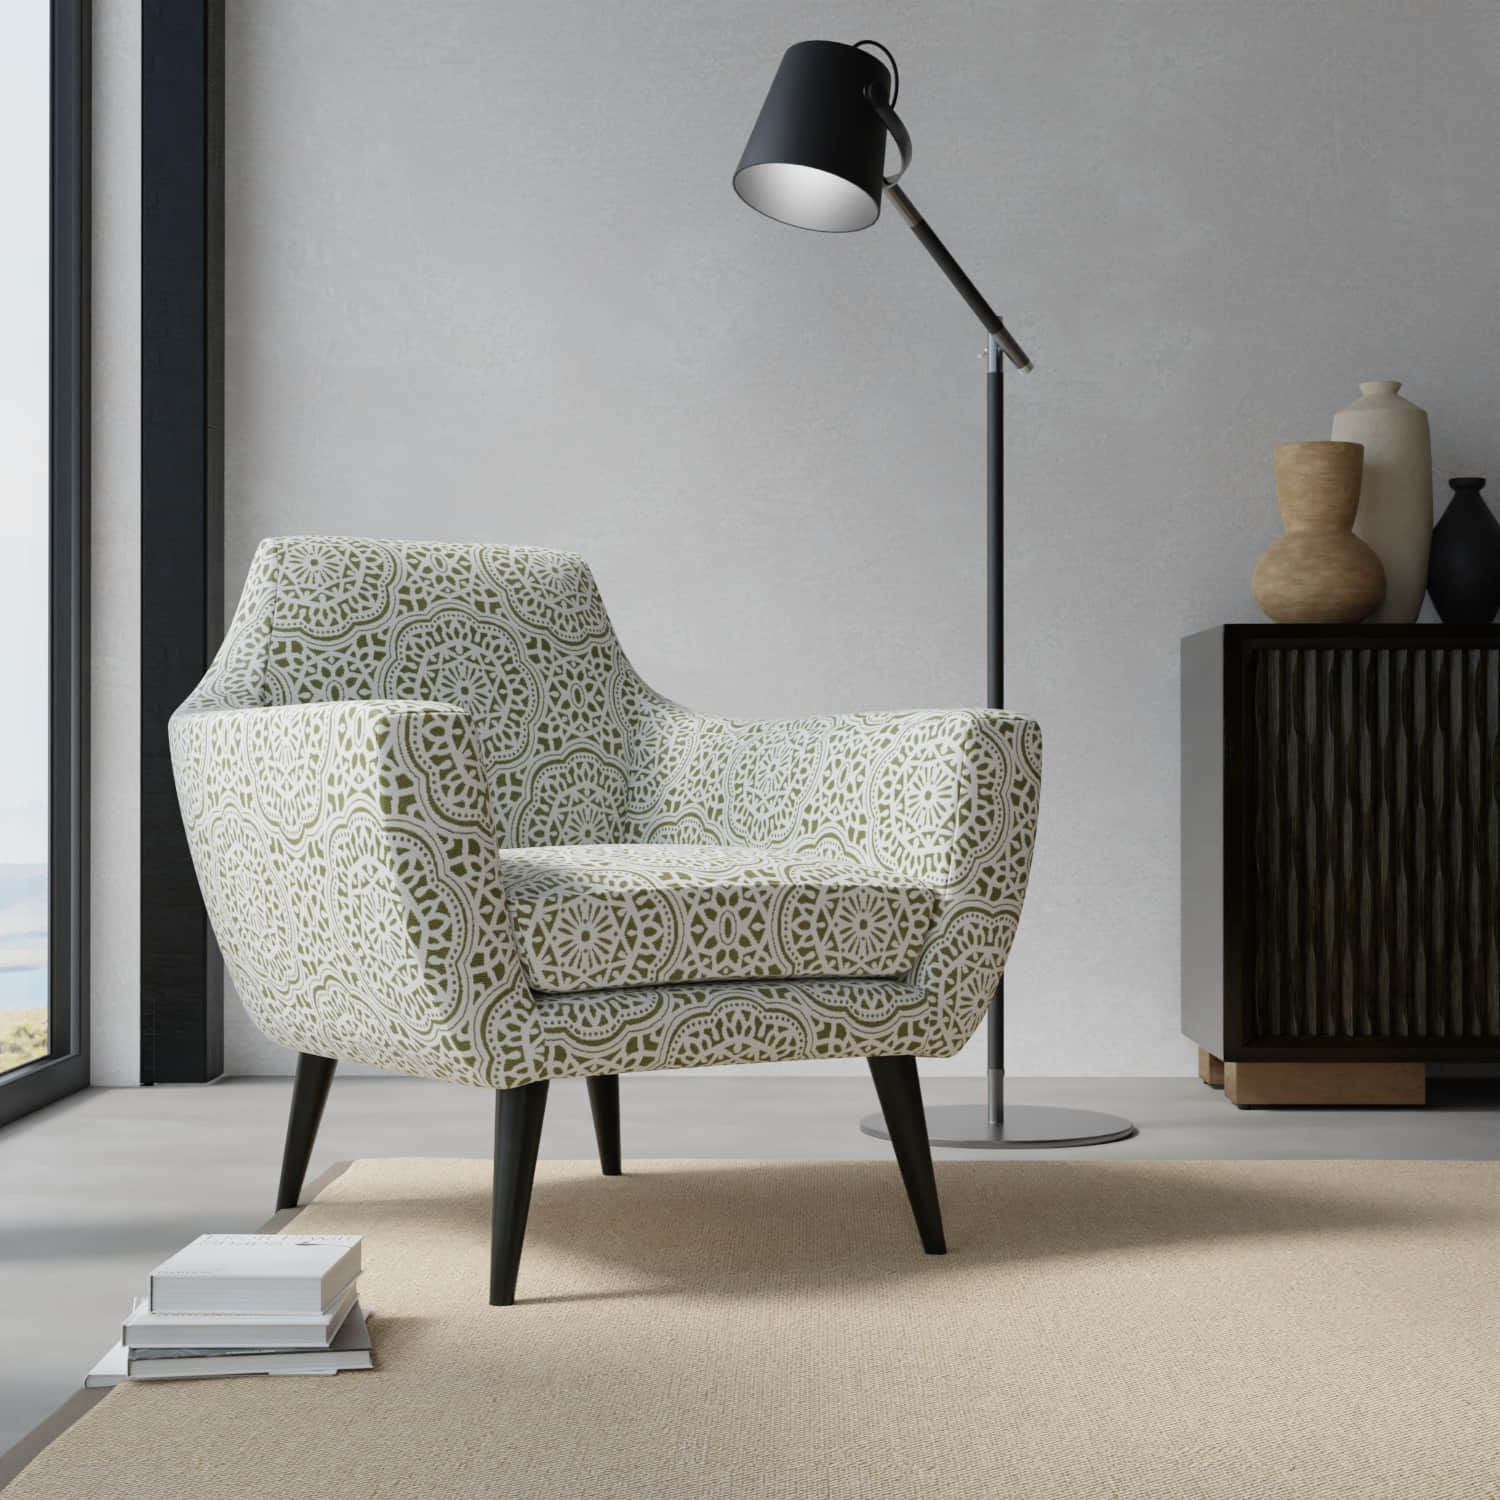 Newman Fern upholstered on a contemporary chair